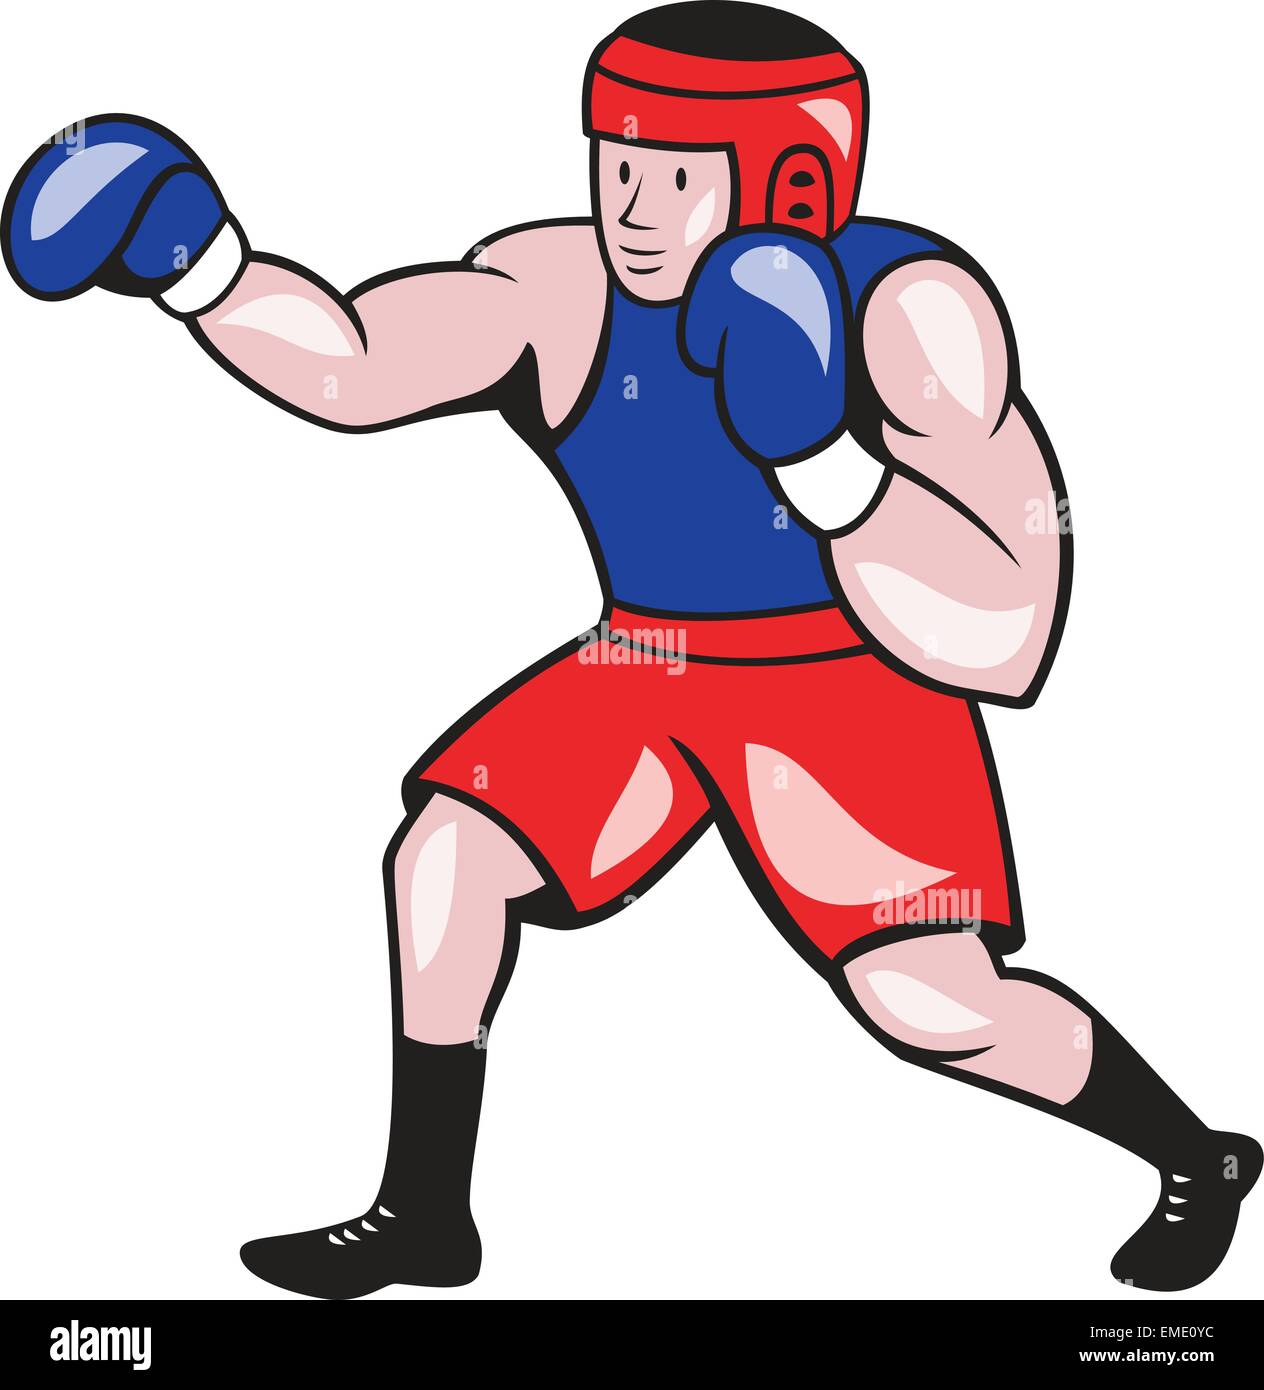 Boxing sketch Stock Photos Royalty Free Boxing sketch Images   Depositphotos